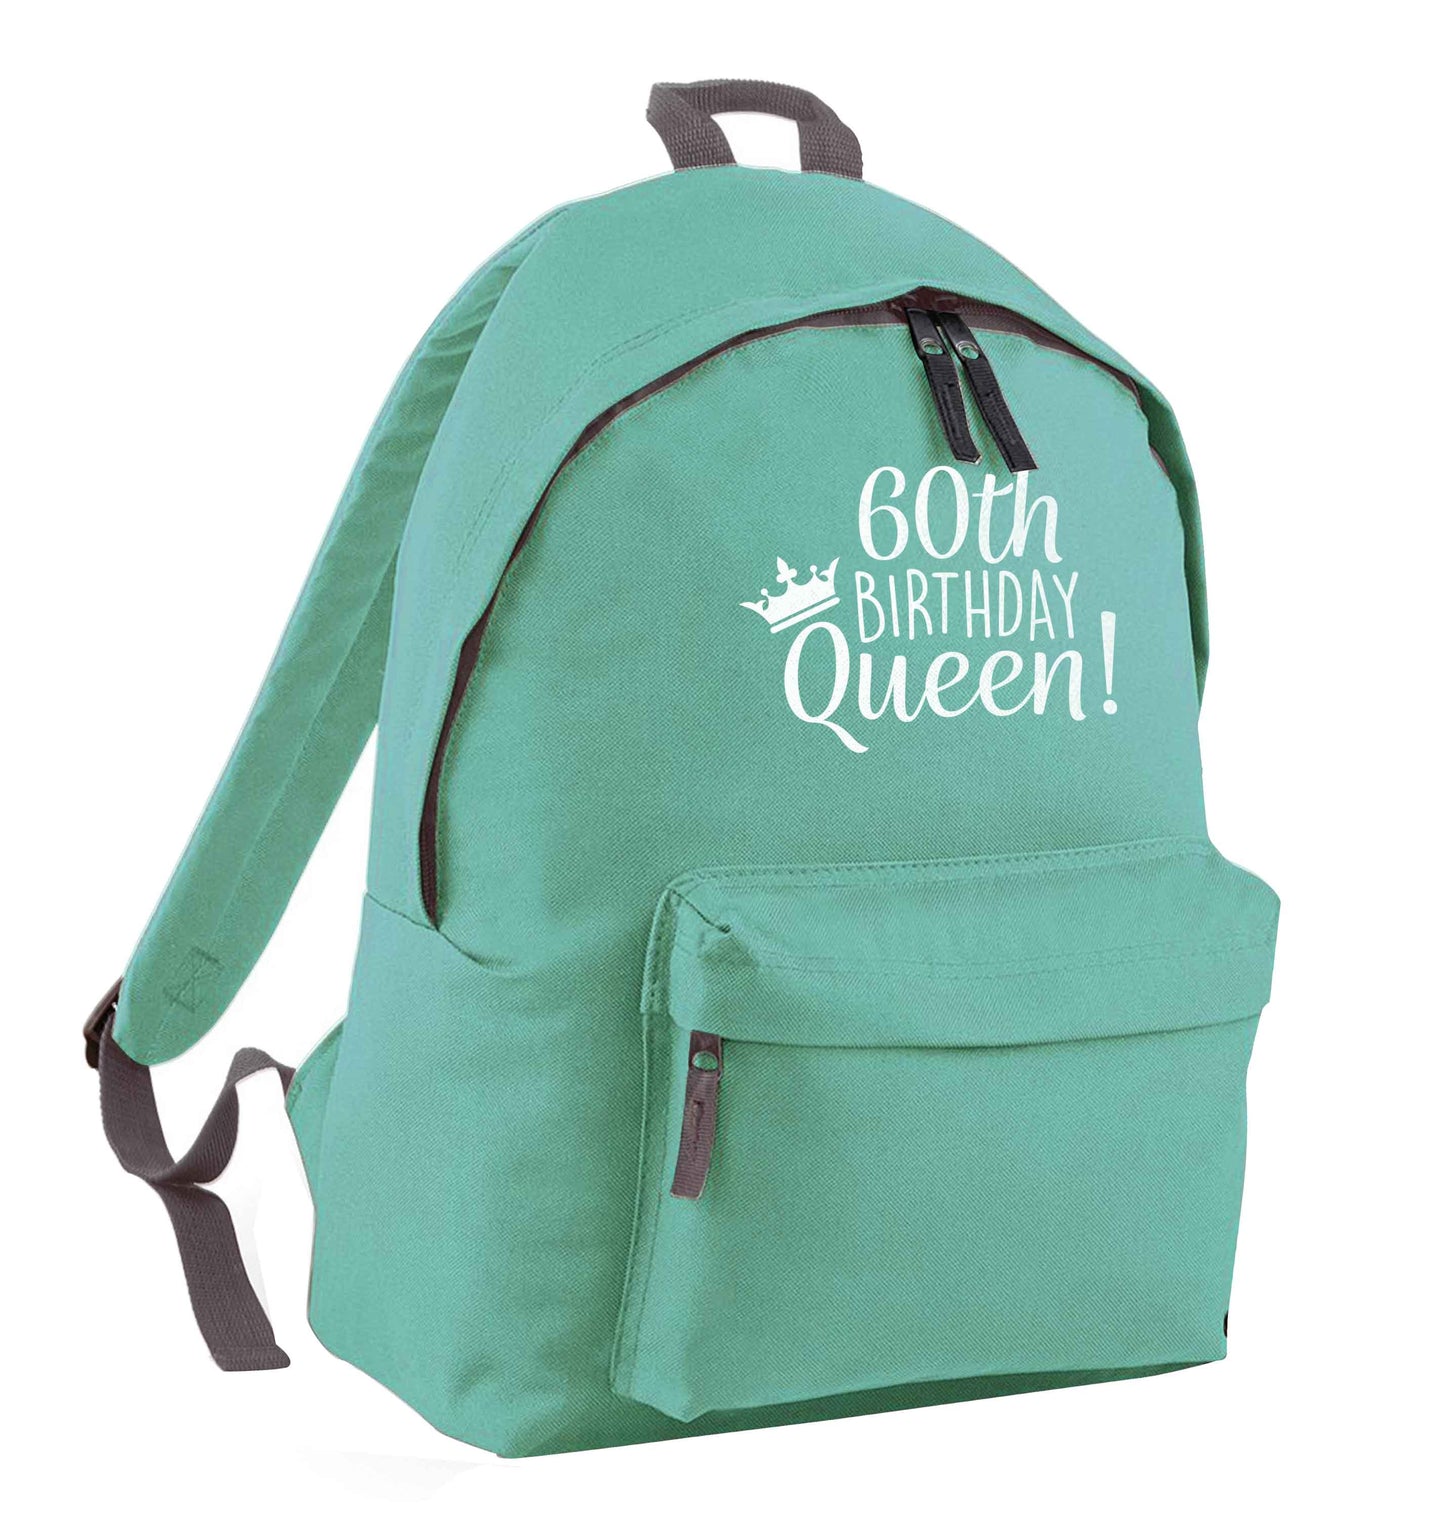 60th birthday Queen mint adults backpack